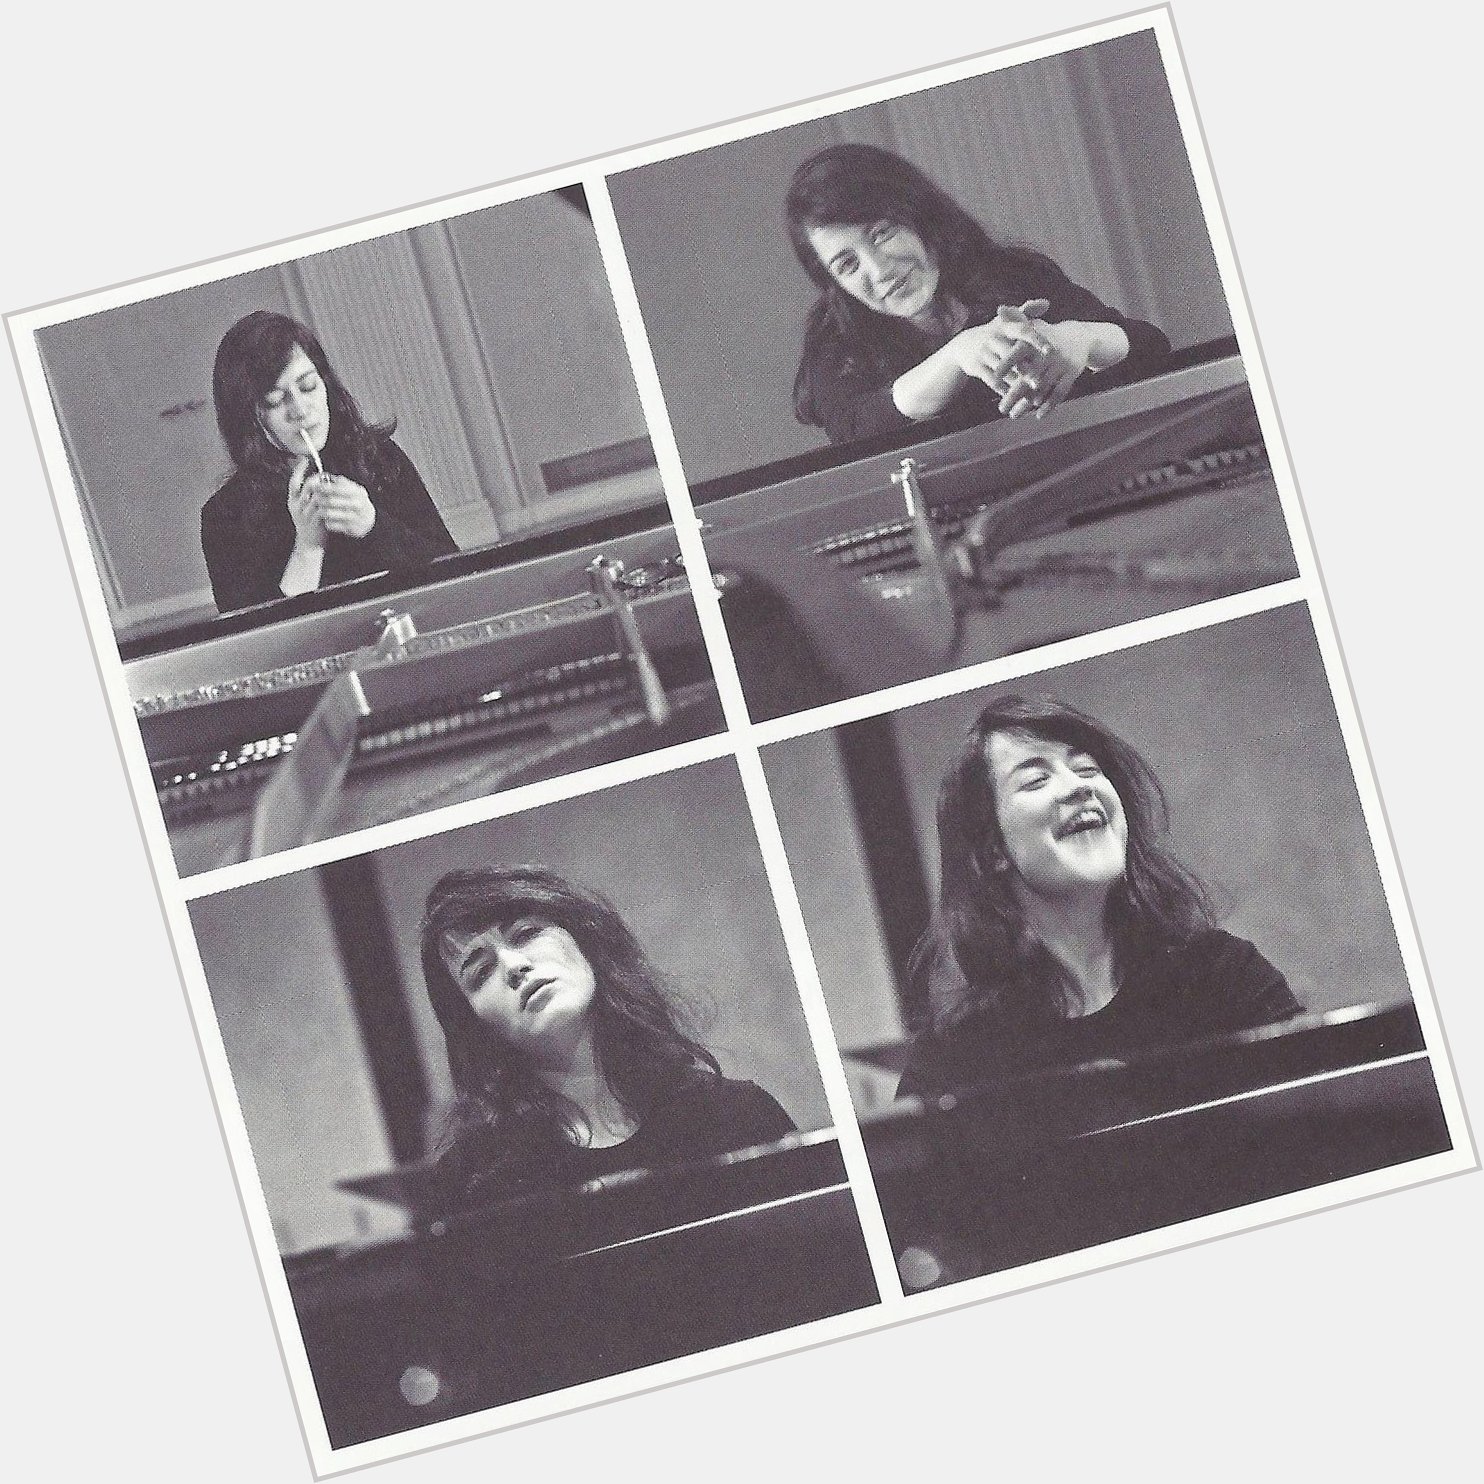 Happy 80th birthday today to the great Argentinian classical pianist Martha Argerich. Photos from a shoot in 1964. 